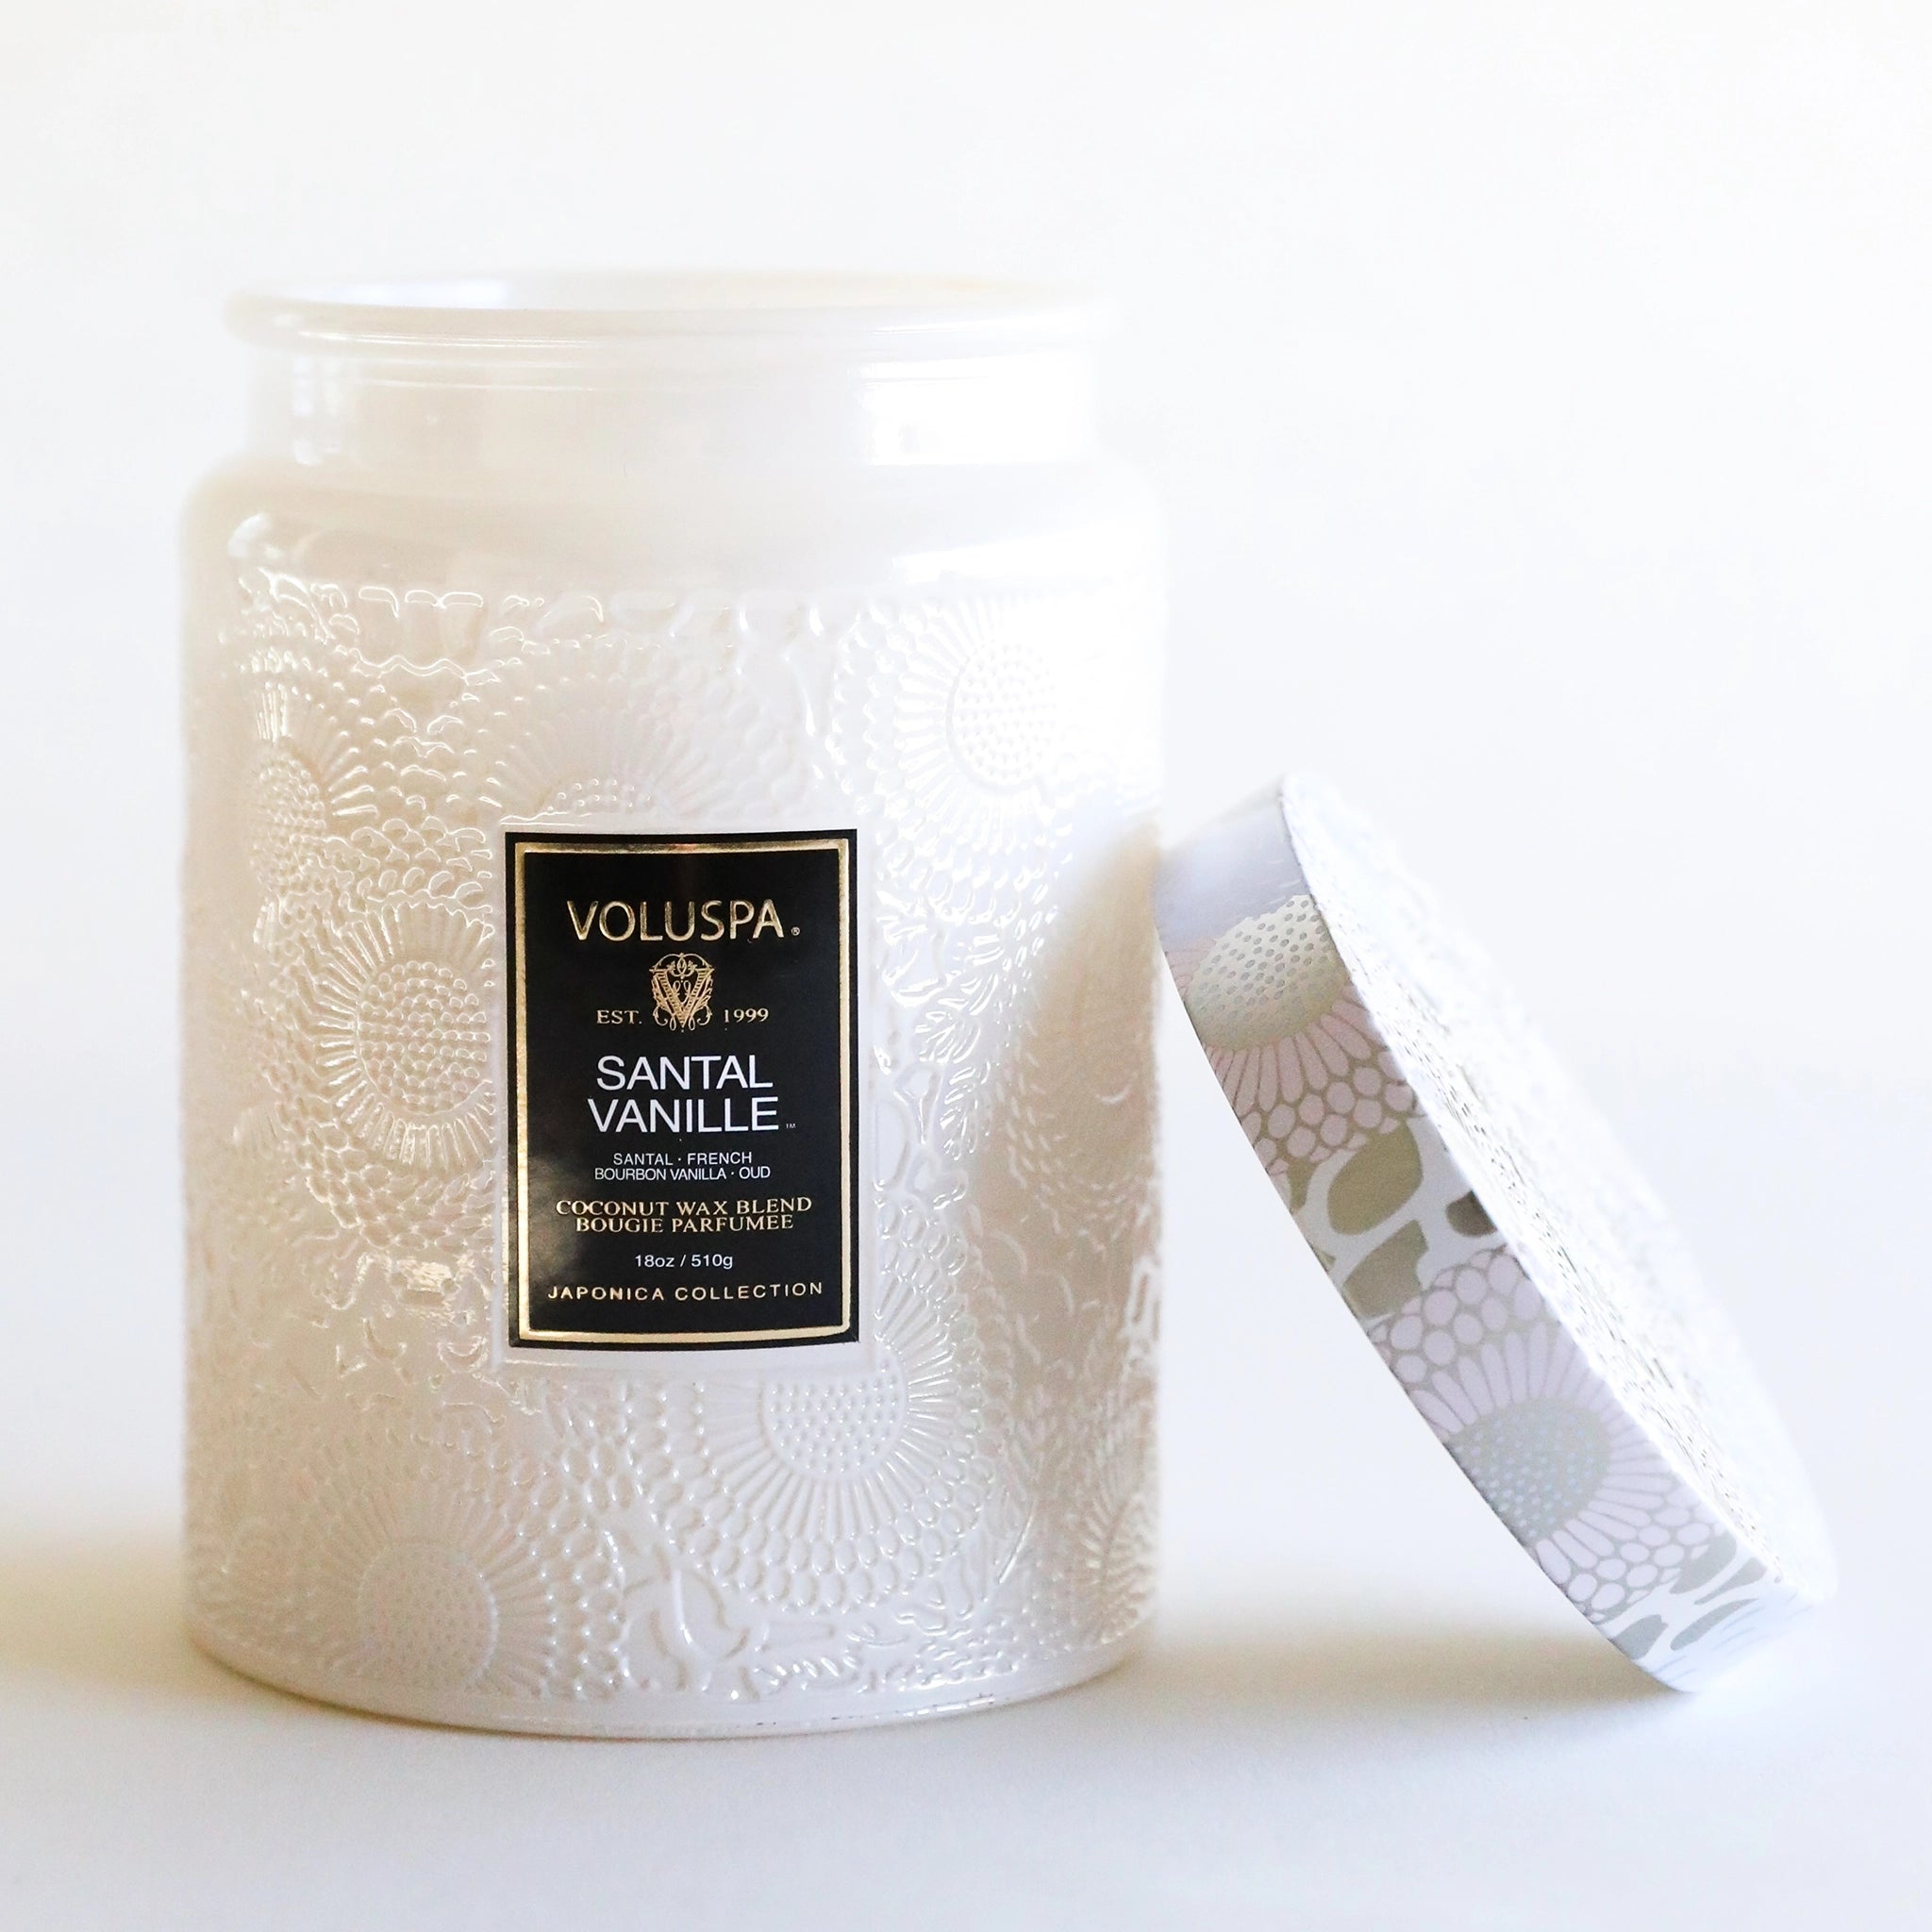 In front of a white background is a large light pink glass jar. The glass jar has a floral pattern all over it. In the middle is a black rectangular sticker with gold text at the top that reads ‘voluspa.’ Below is white text that reads ‘santal vanille.’ Leaning against the right side of the jar is a round tin lid. The lid has a light pink, silver and lavender flower pattern on it.